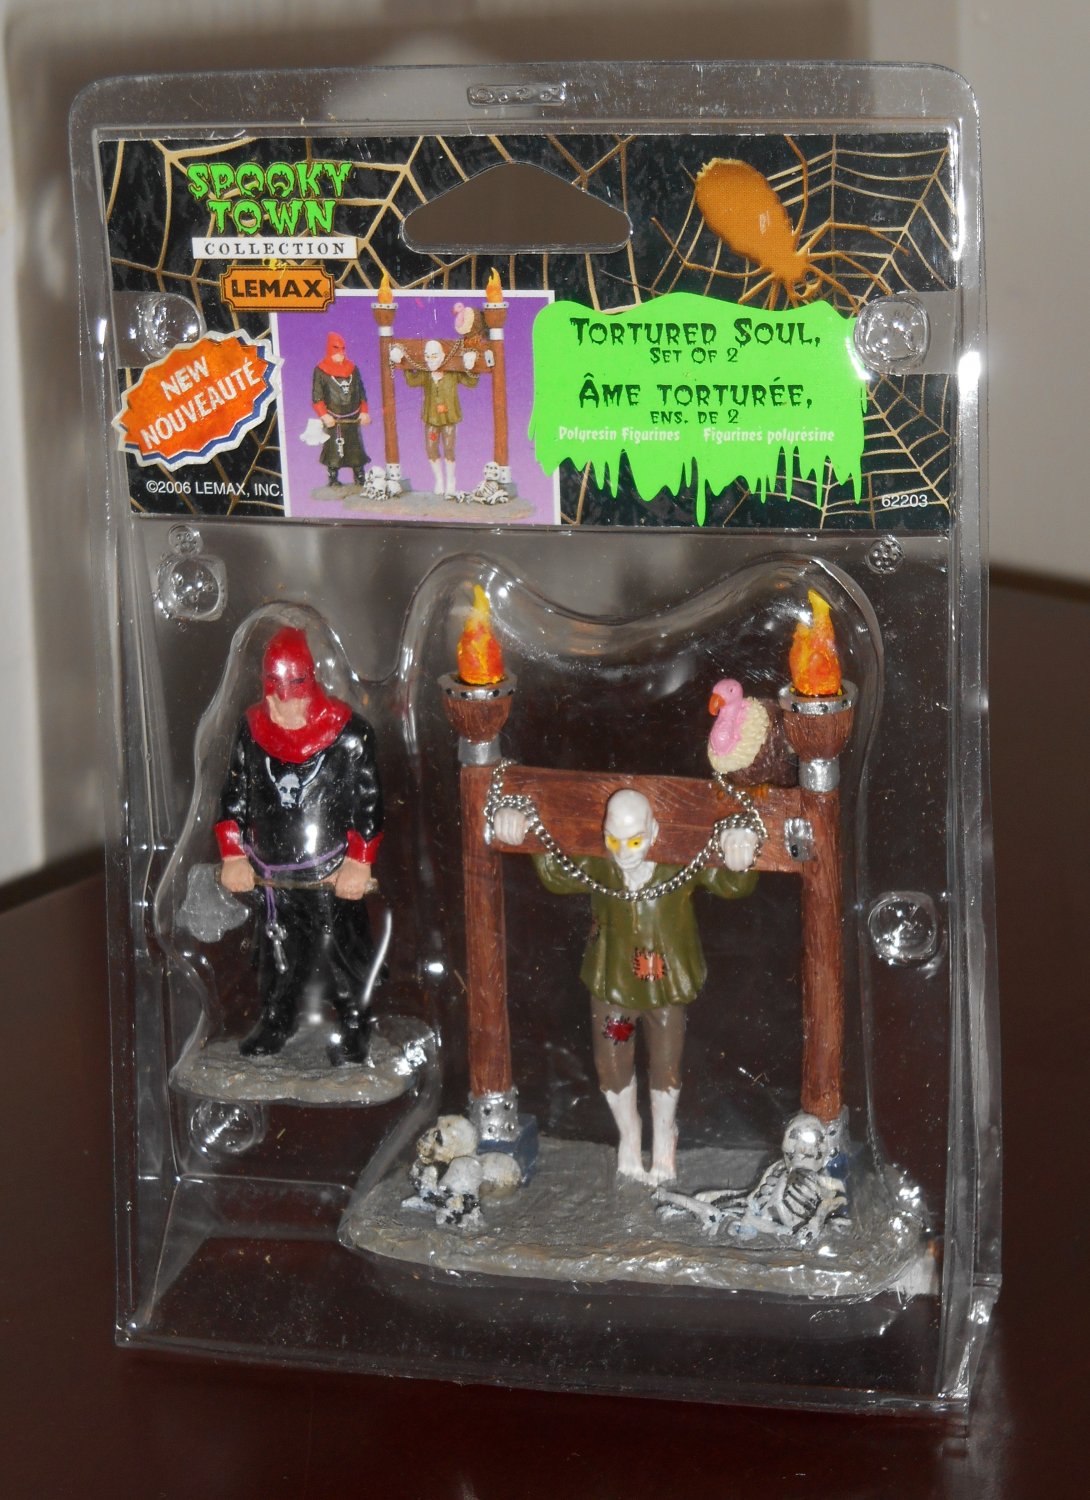 Tortured Soul Set of 2 Figurines Lemax 62203 Spooky Town Collection 2006 Halloween